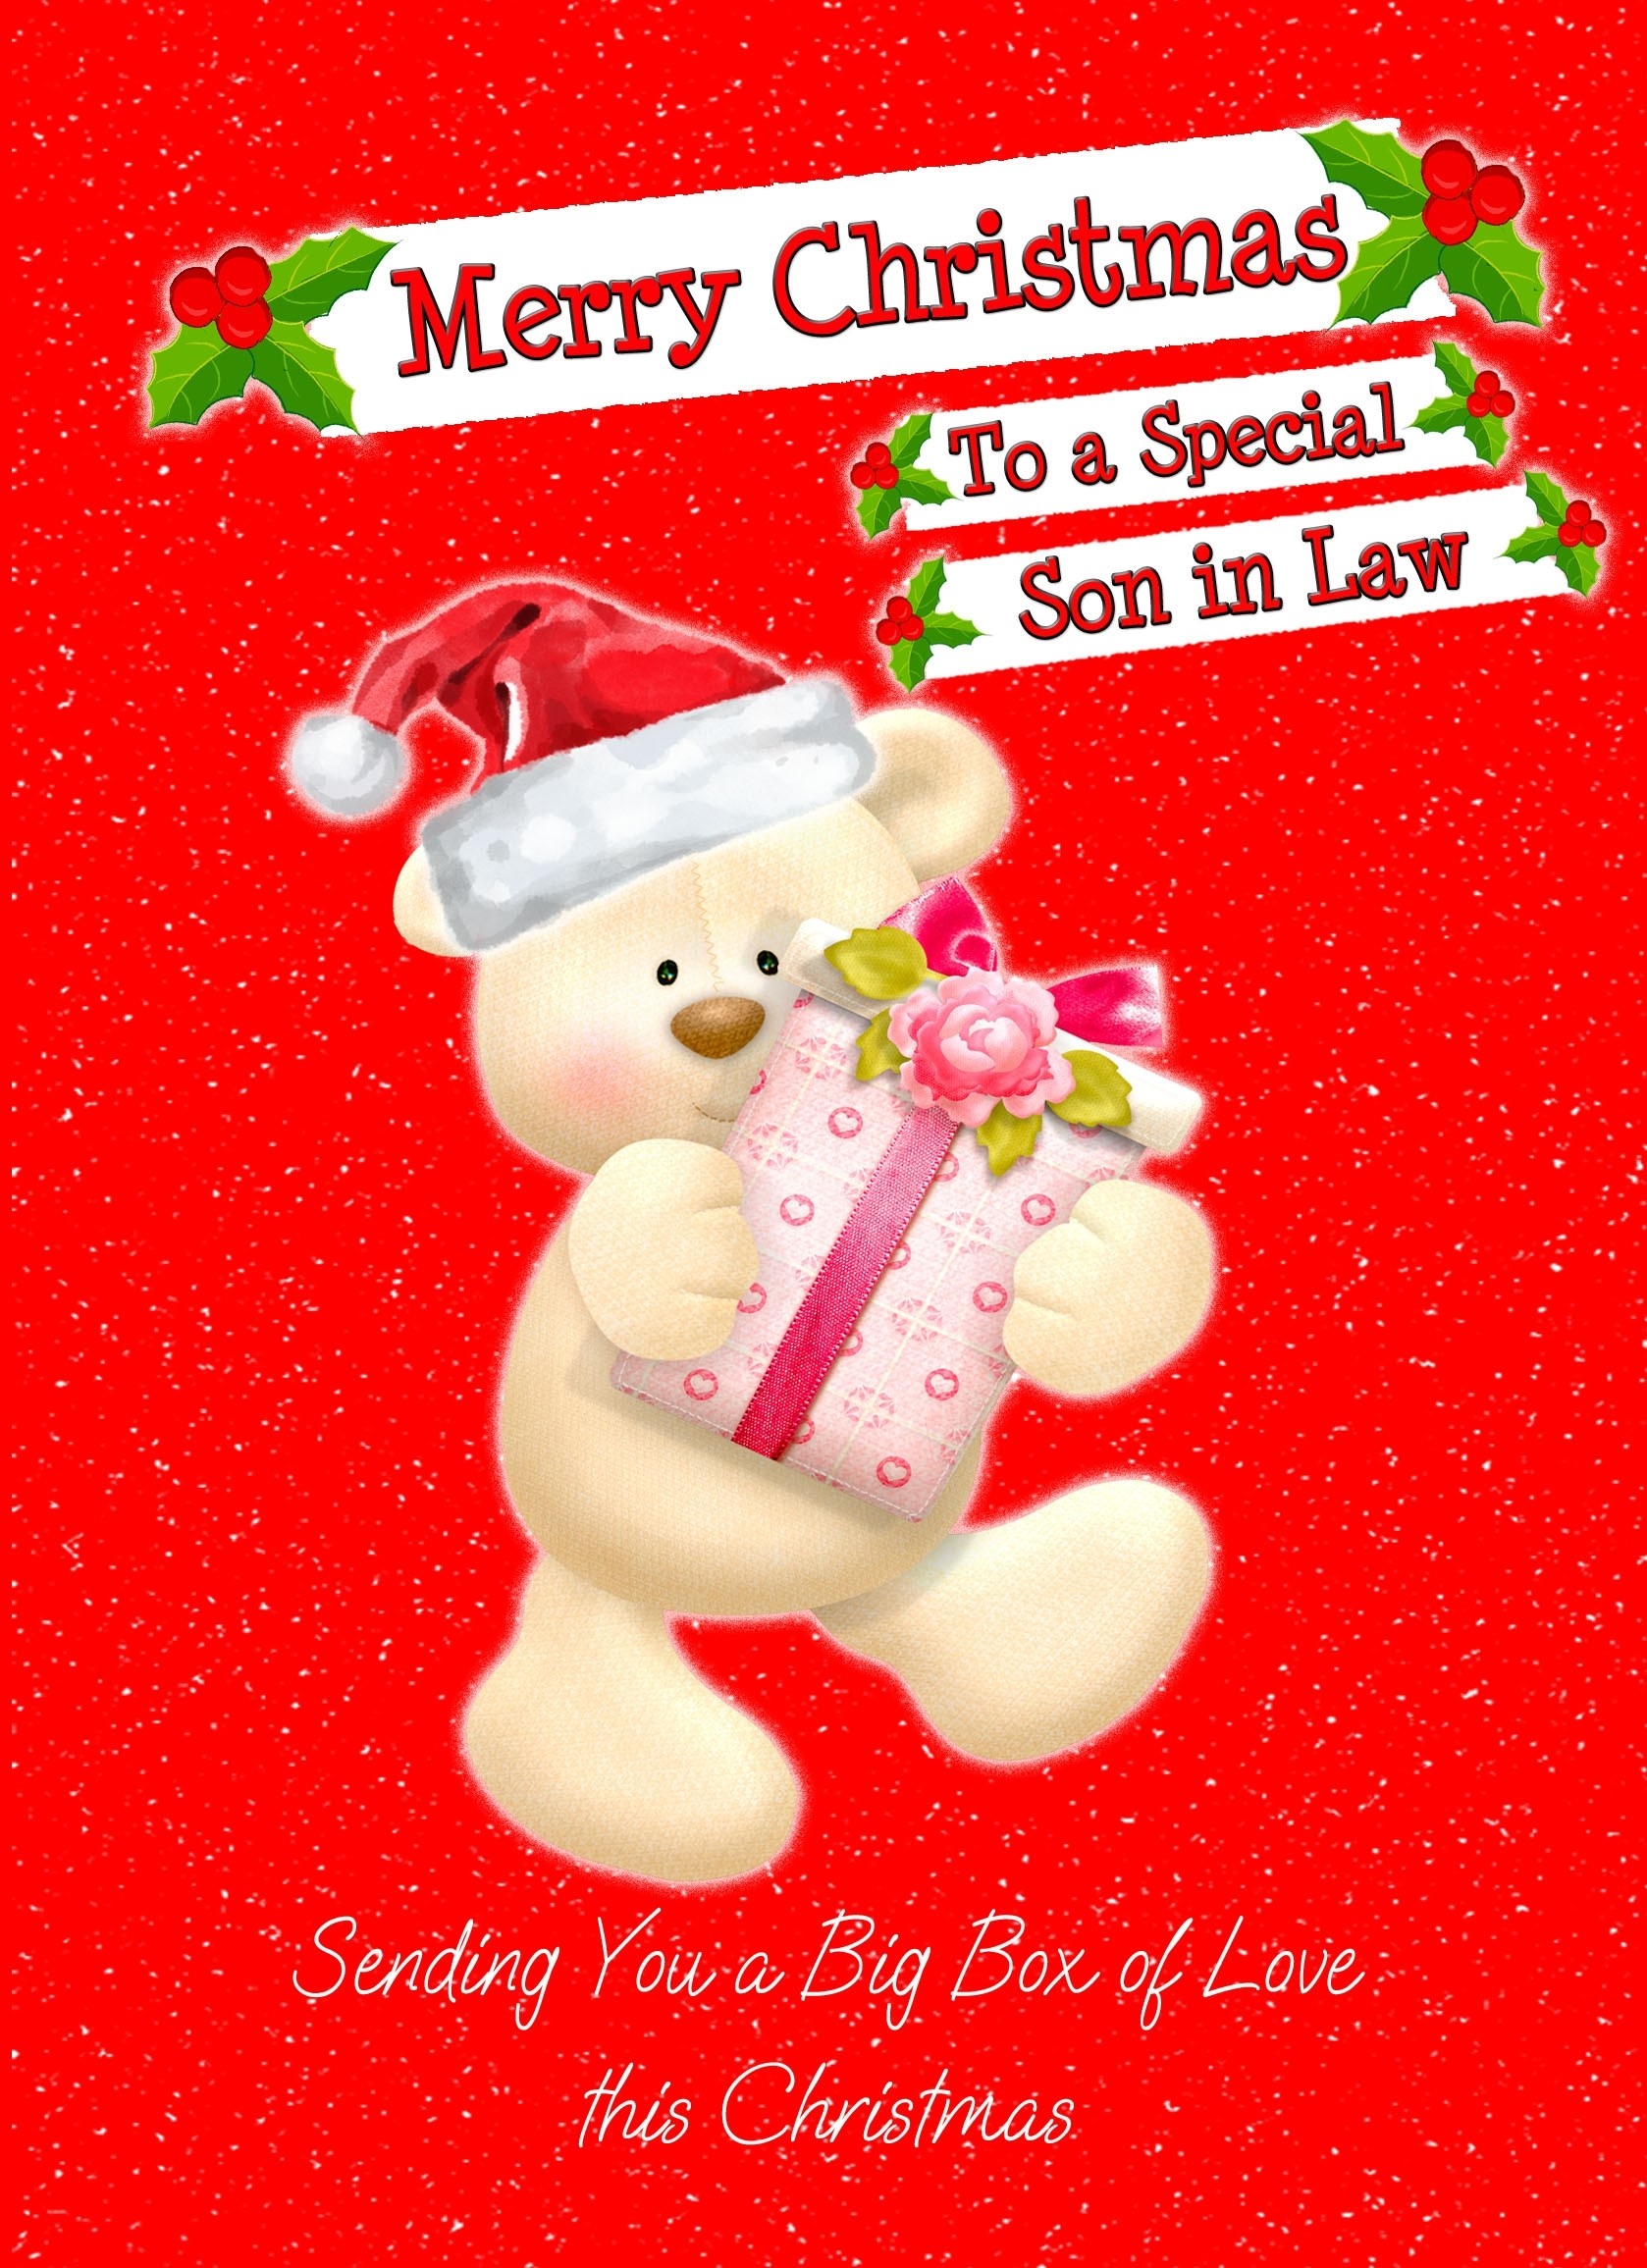 Christmas Card For Son in Law (Red Bear)